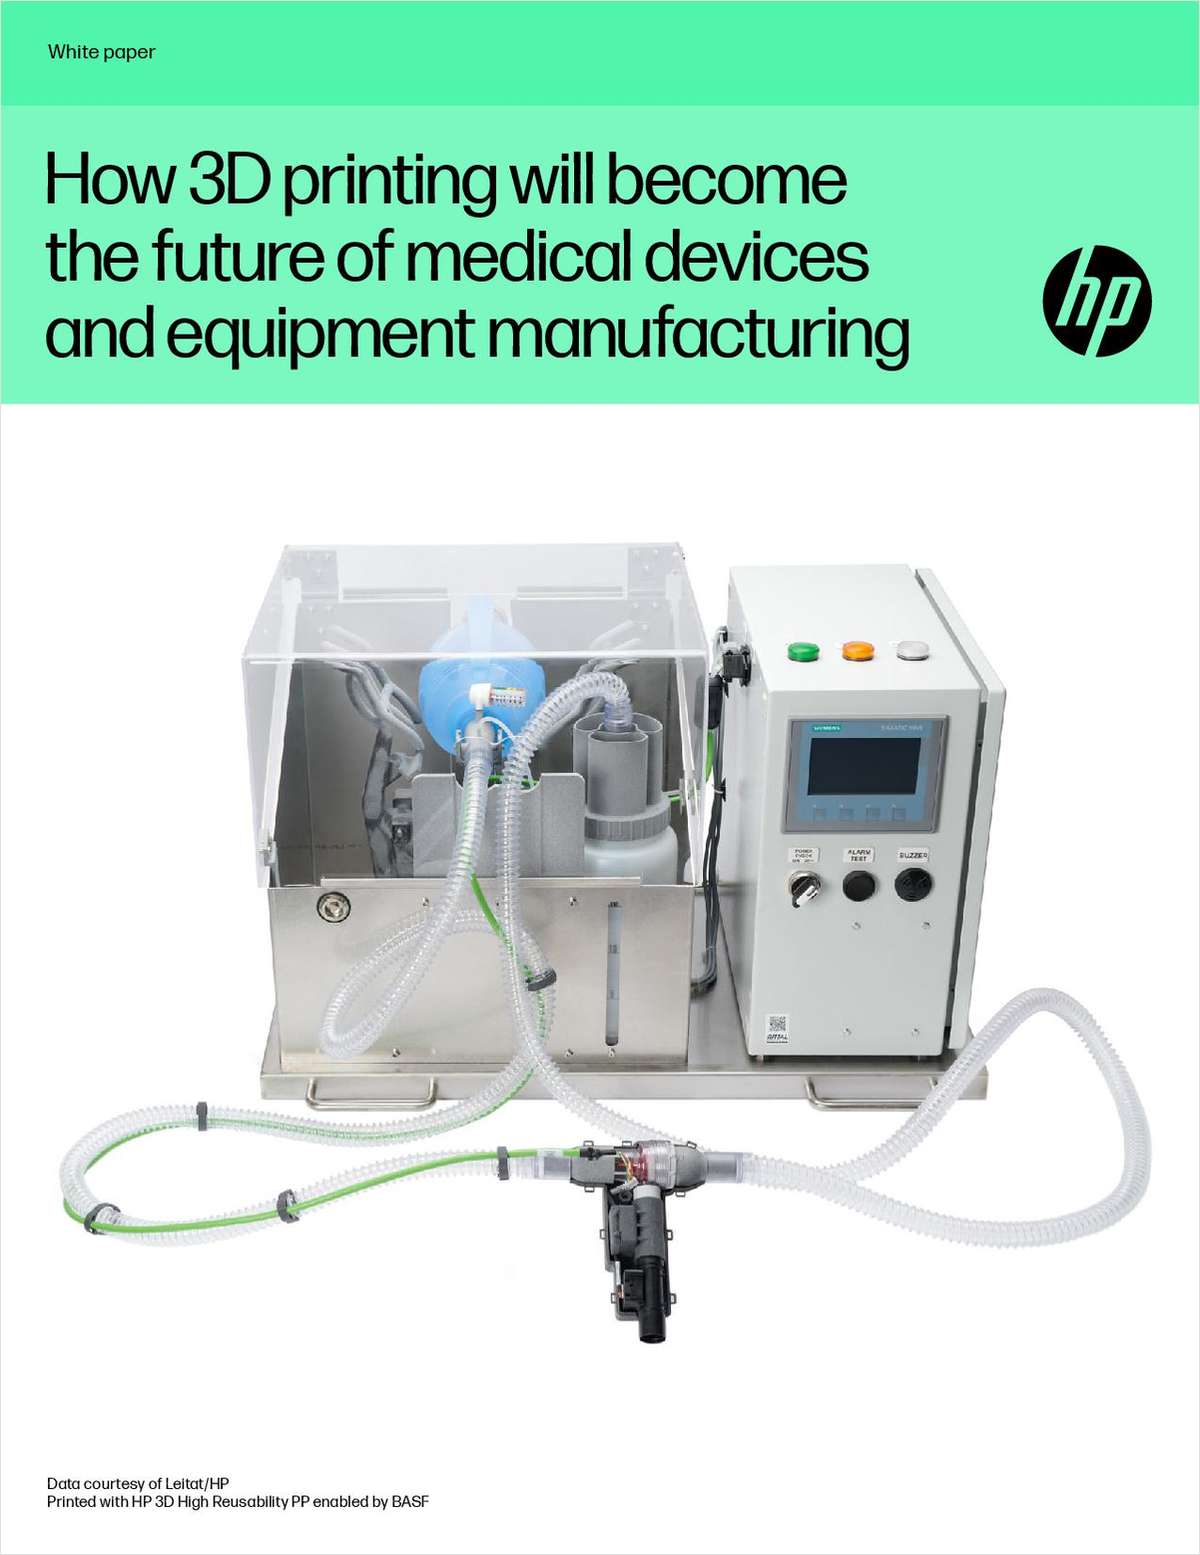 How 3D Printing Will Become the Future of Medical Devices and Equipment Manufacturing